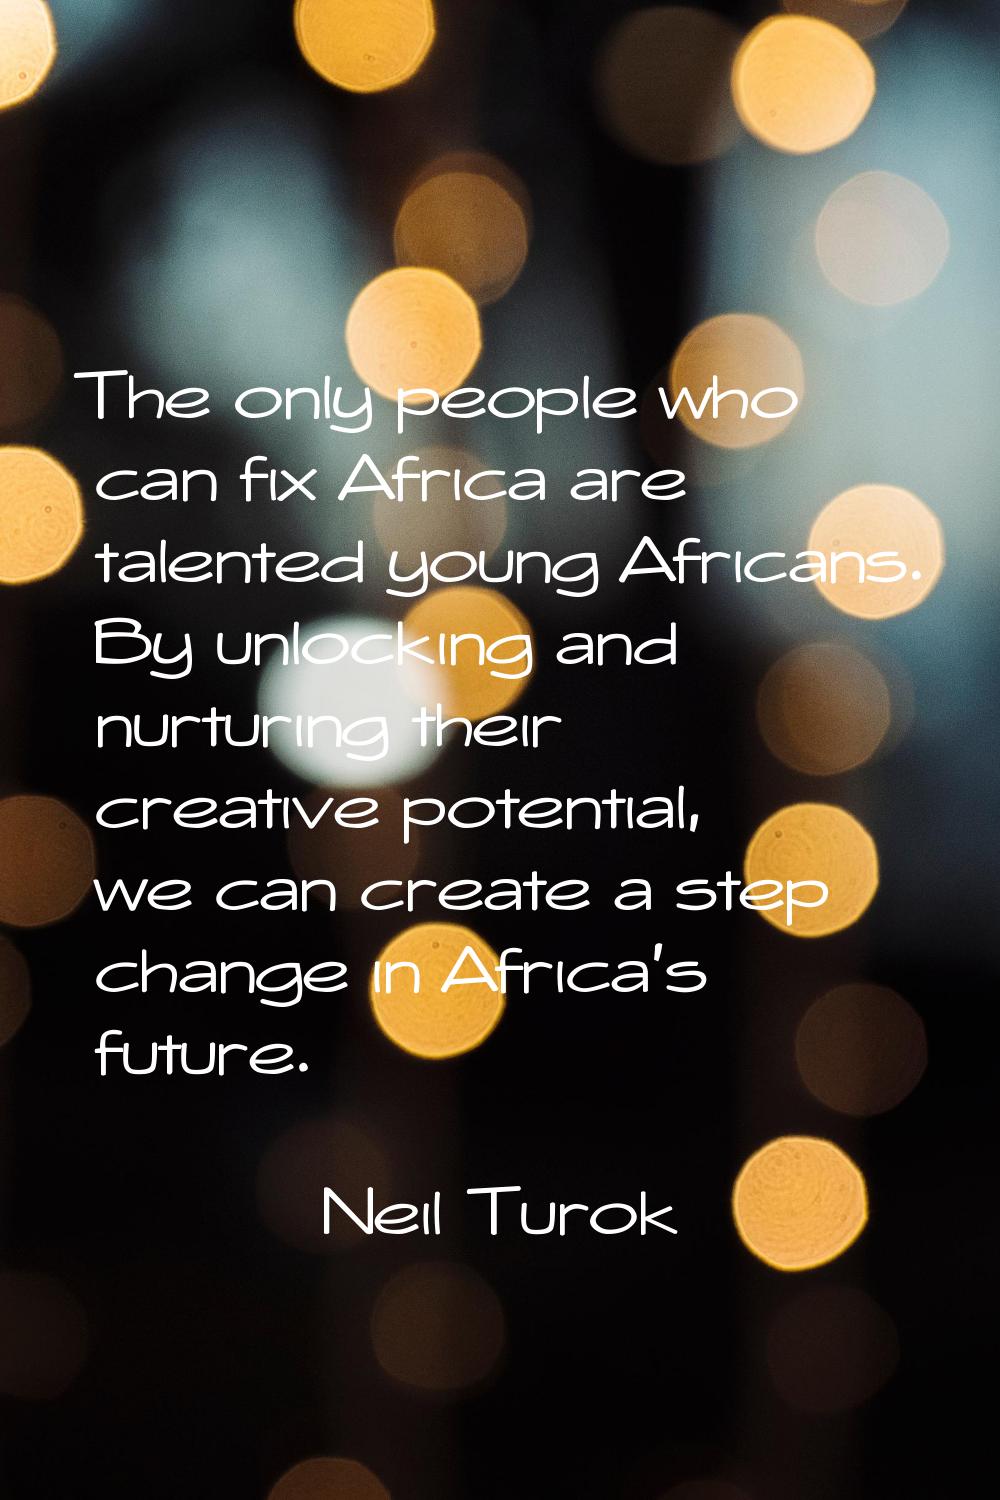 The only people who can fix Africa are talented young Africans. By unlocking and nurturing their cr